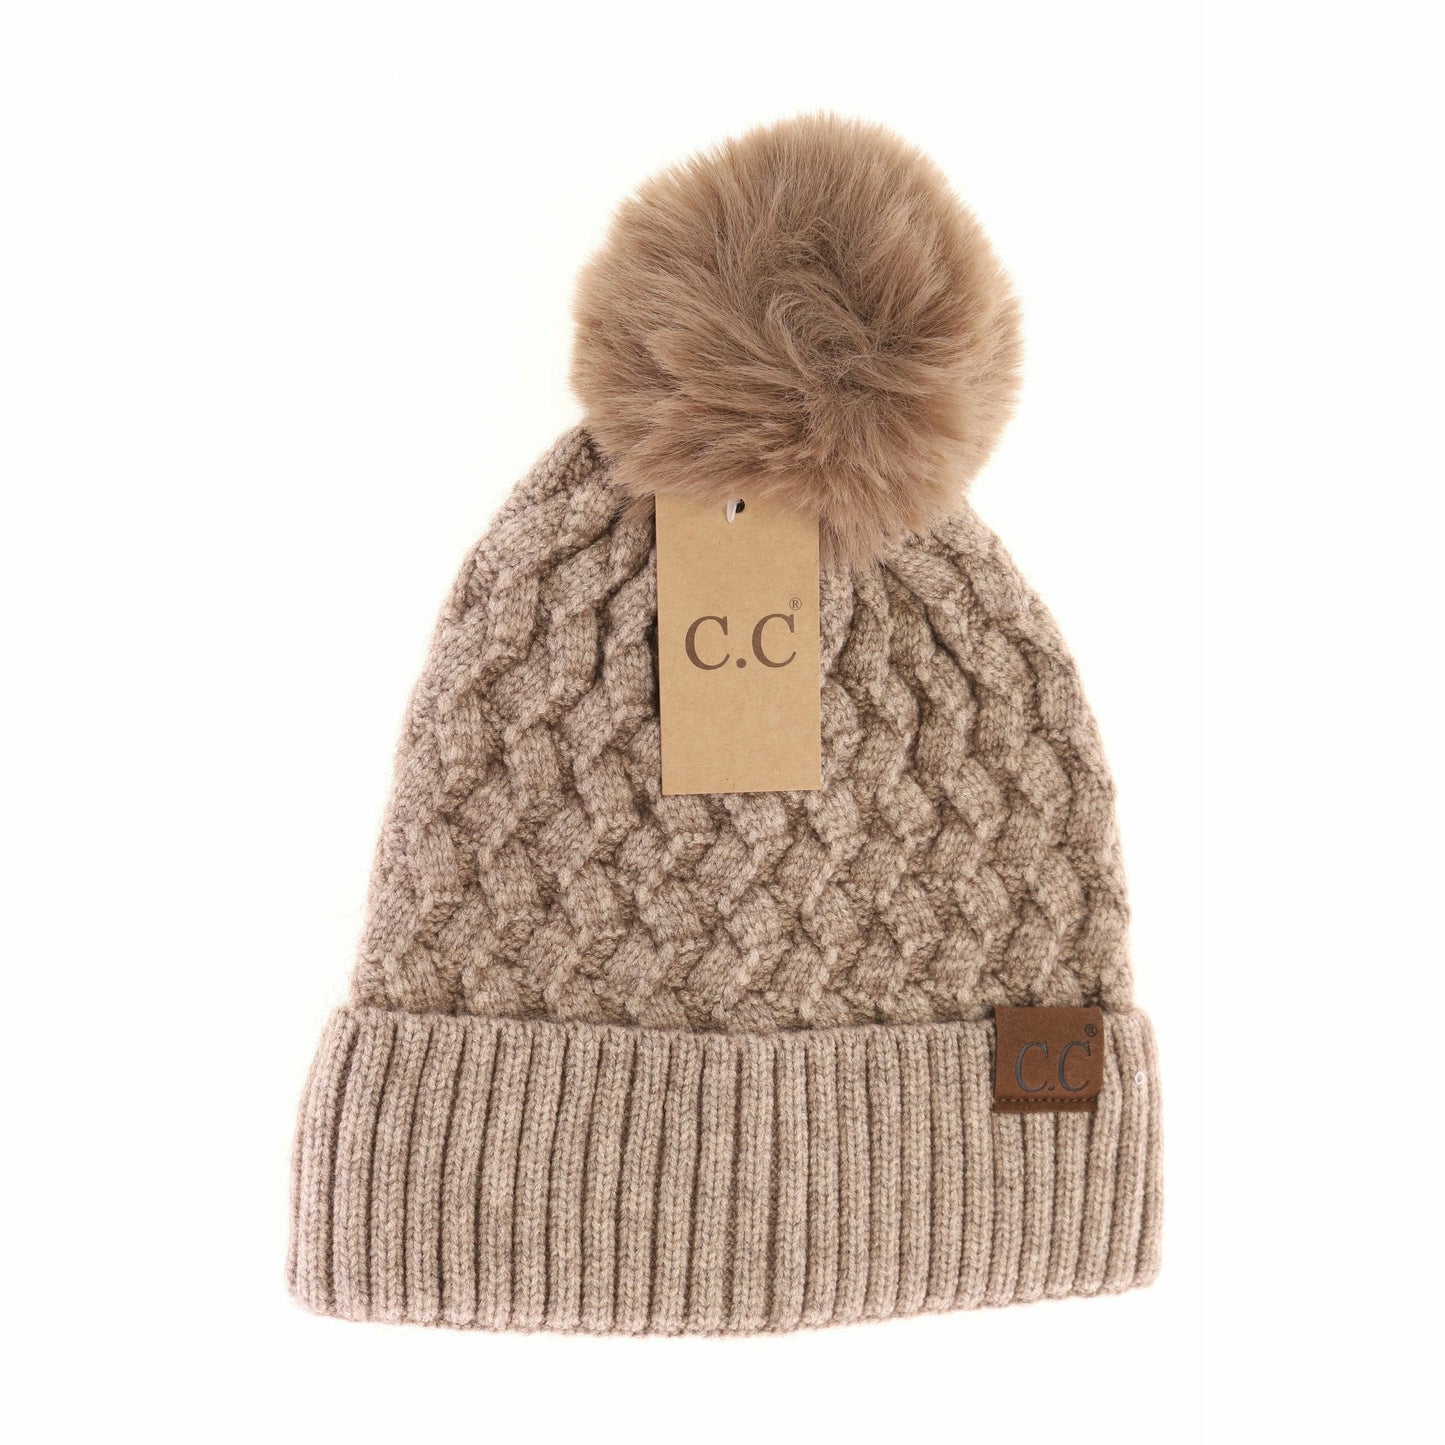 CC Adult Woven Cable Knit Cuffed Matching Fur Pom Beanie